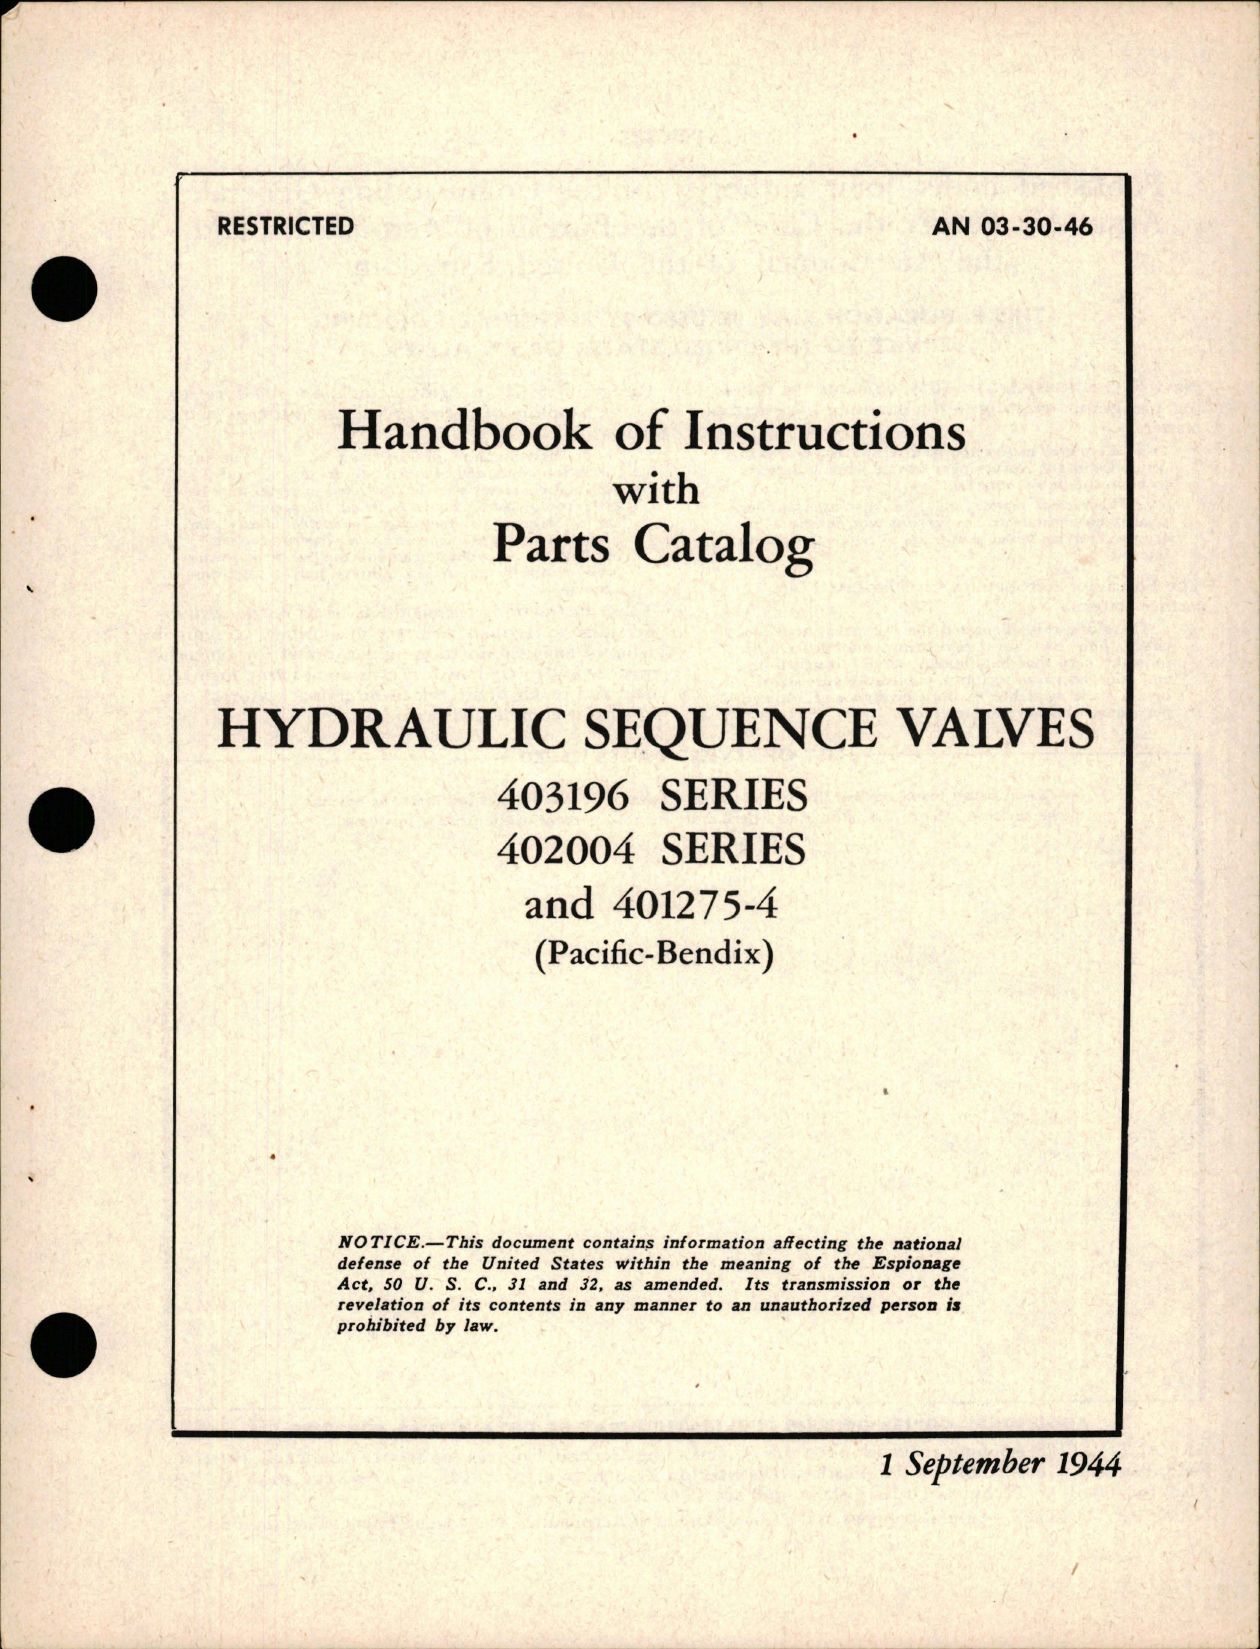 Sample page 1 from AirCorps Library document: Instructions with Parts Catalog for Hydraulic Sequence Valves - 403196 Series, 402004 Series, and 401275-4